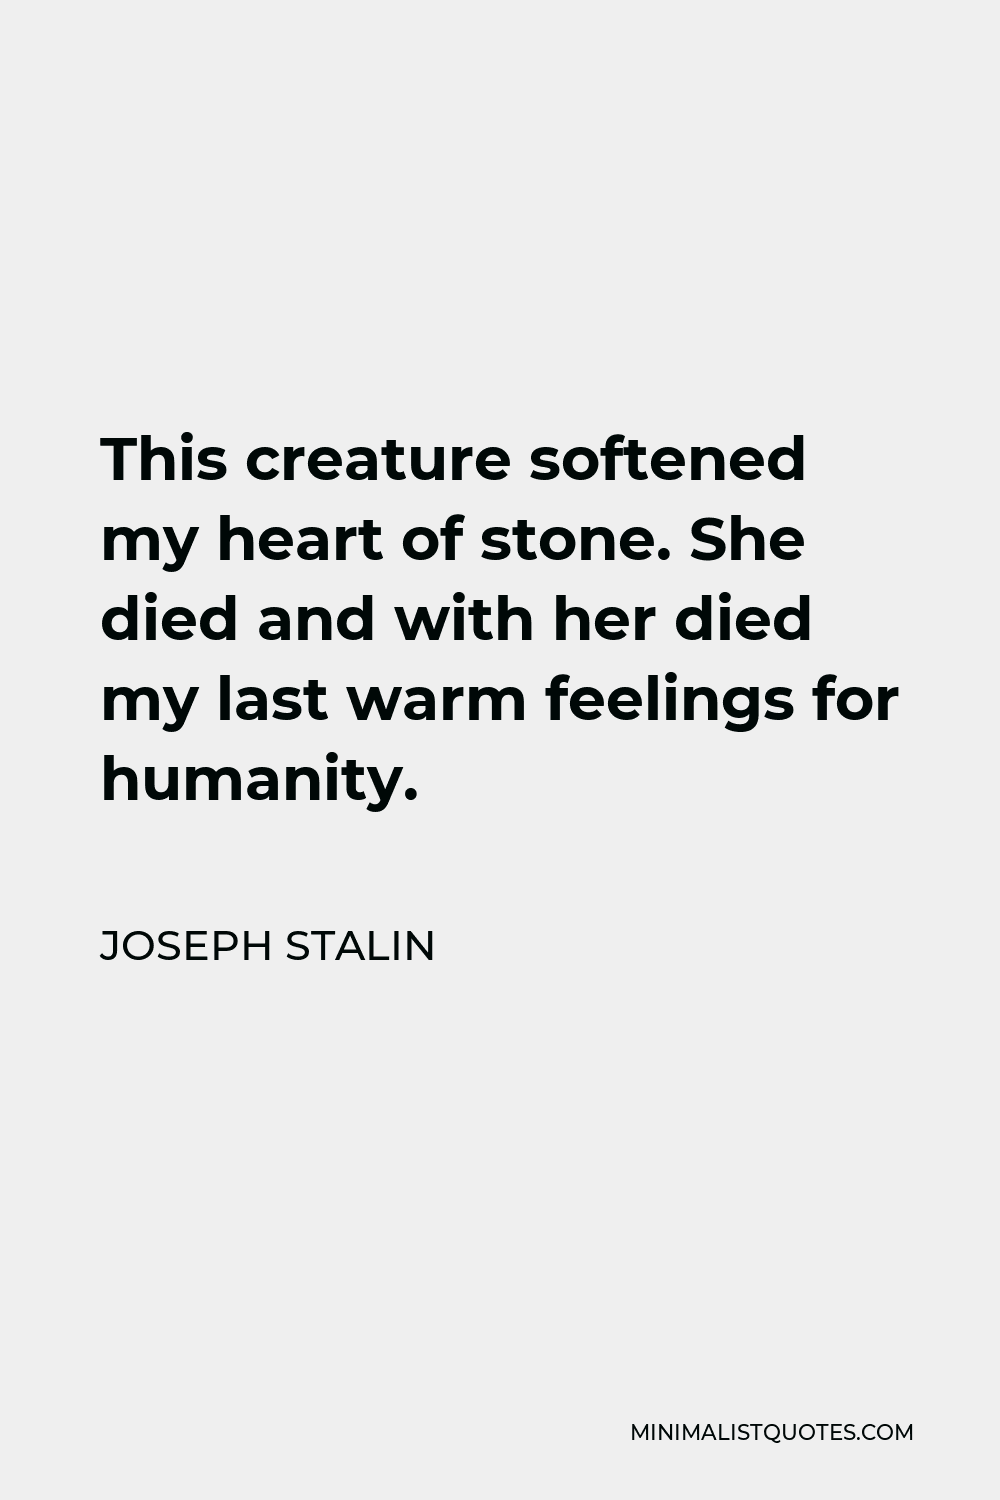 Joseph Stalin Quote - This creature softened my heart of stone. She died and with her died my last warm feelings for humanity.